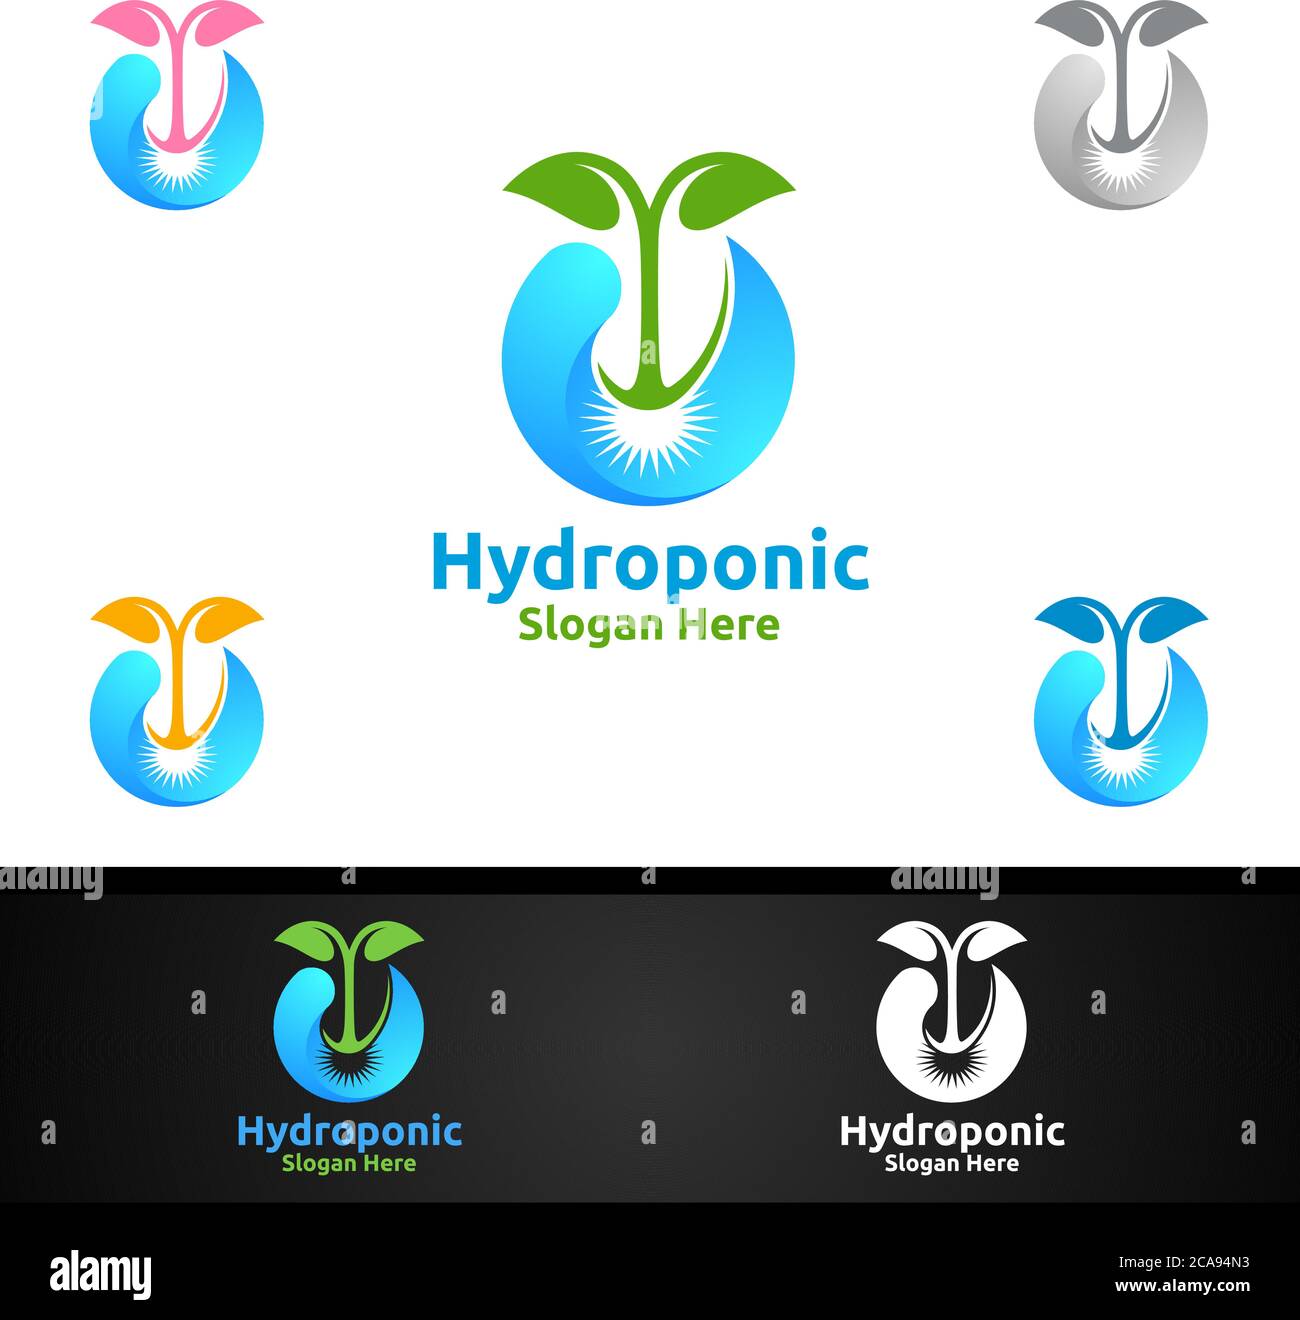 Water Hydroponic Gardener Logo with Green Garden Environment or Botanical Agriculture Vector Design Illustration Stock Vector